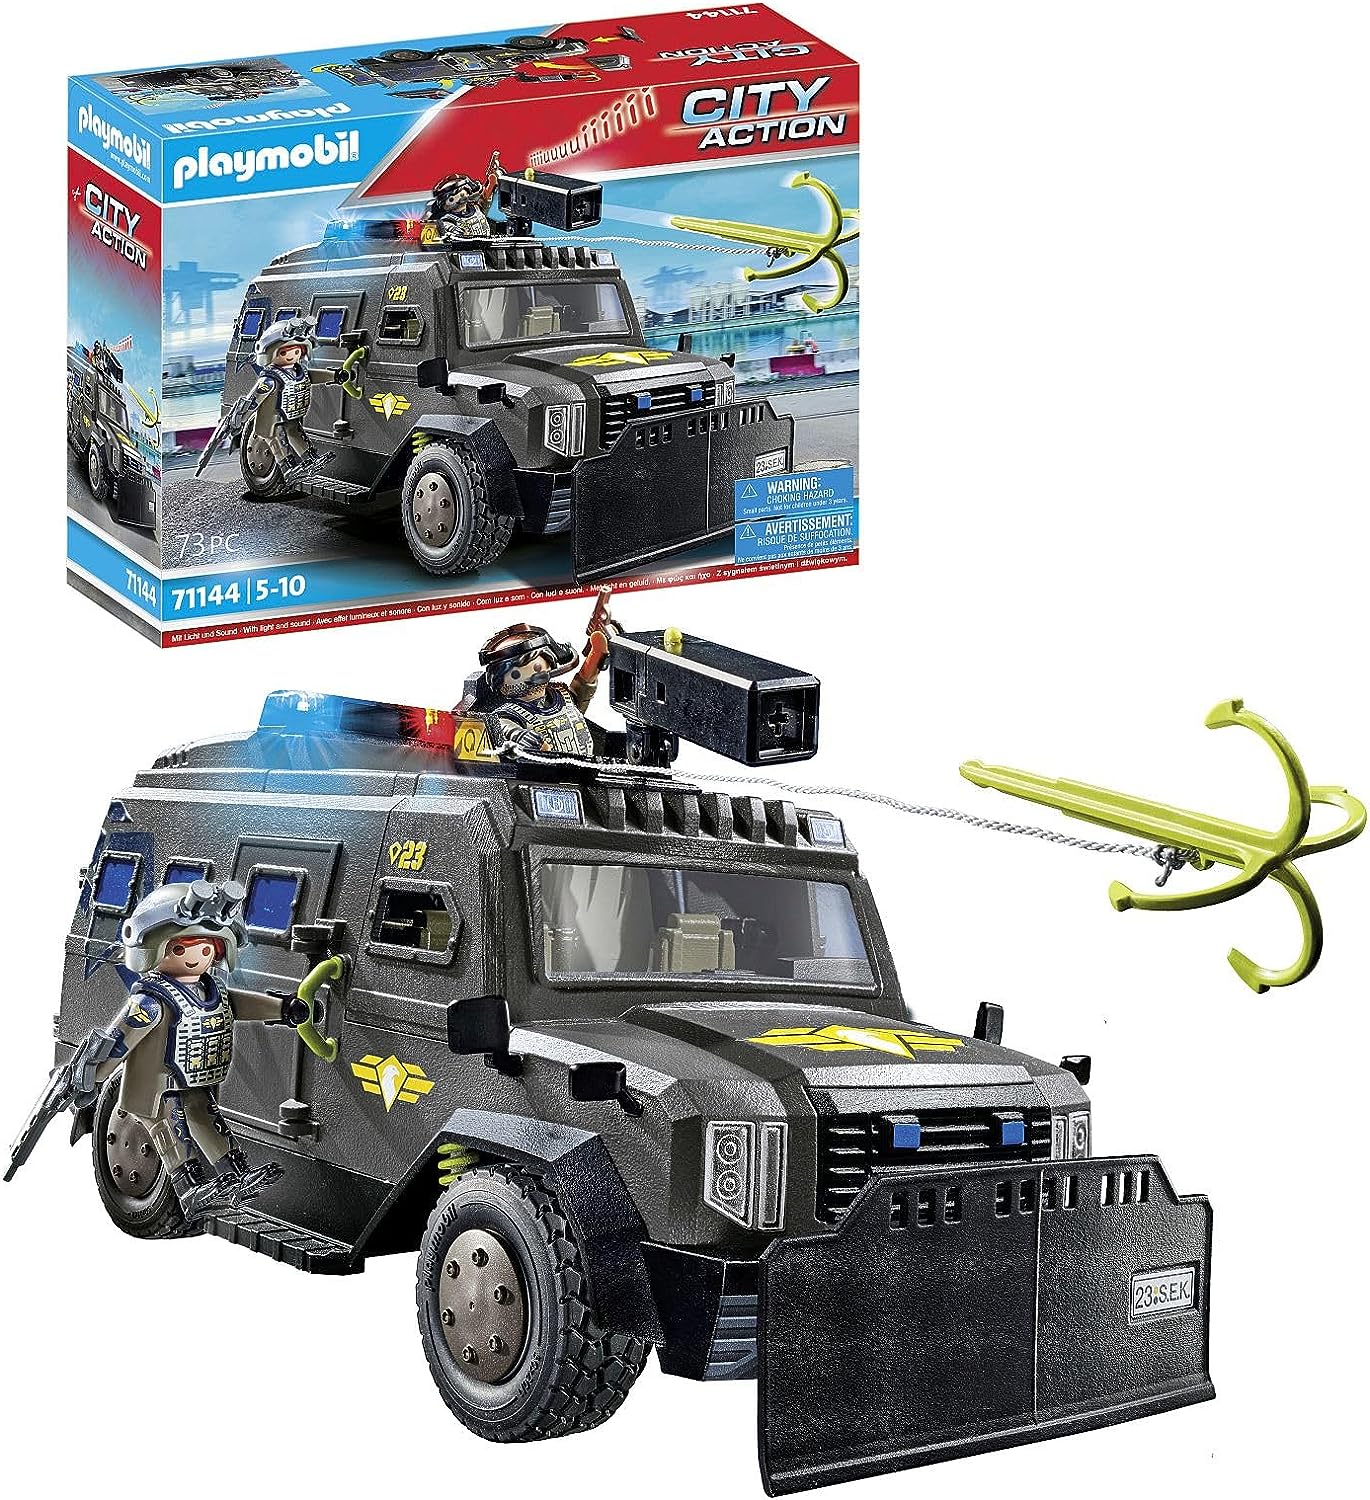 PLAYMOBIL City Action 71144 SWAT Off-Road Vehicle, Modern SEK Off-Road Vehicle with Light and Sound, Toy for Children from 5 Years